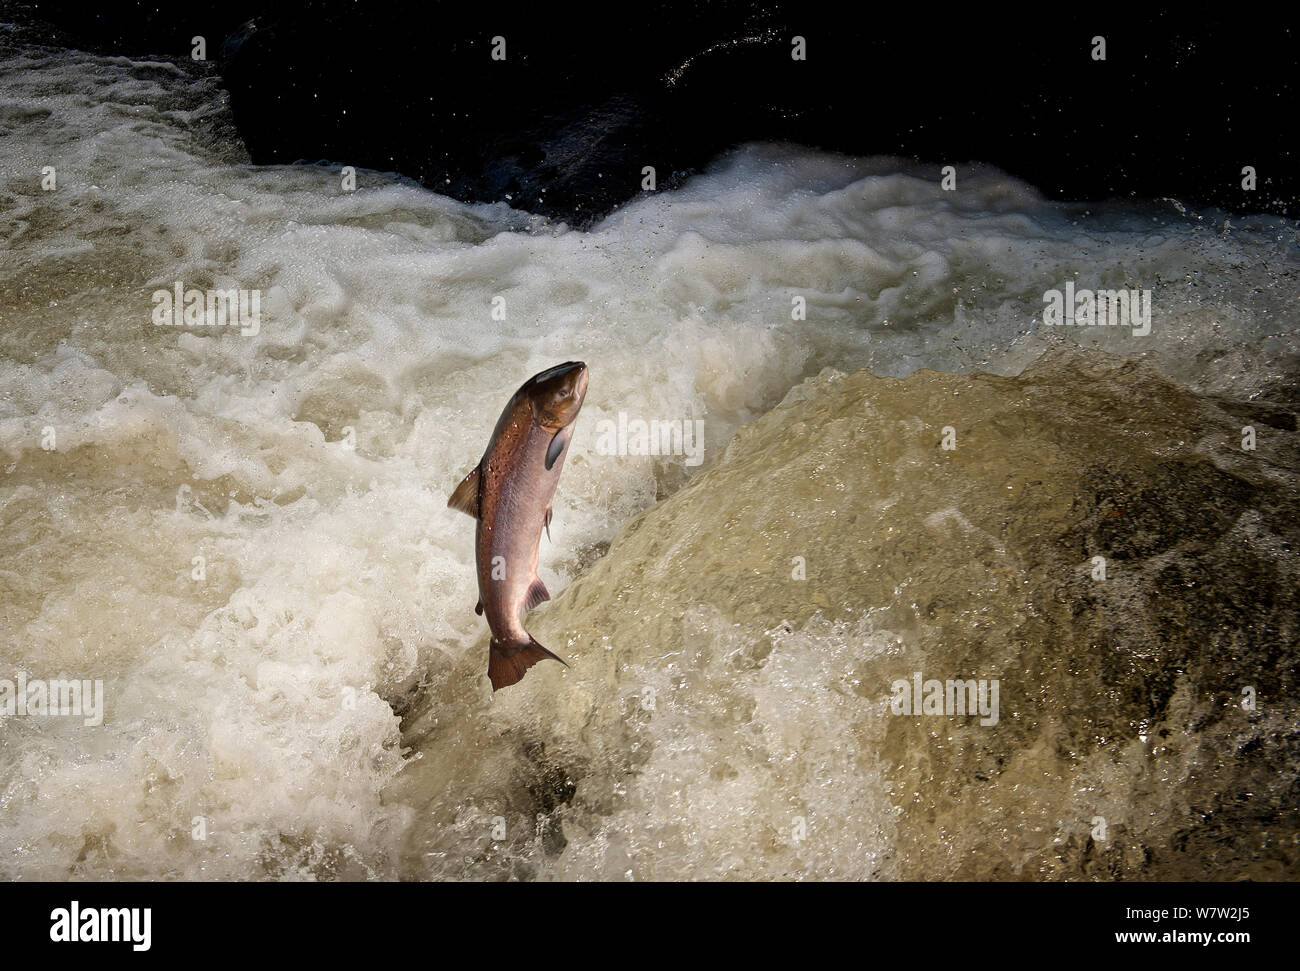 Atlantic Salmon (Salmo salar) jumping a waterfall on the Afon Lledr, Betws Y Coed, Wales, October Stock Photo